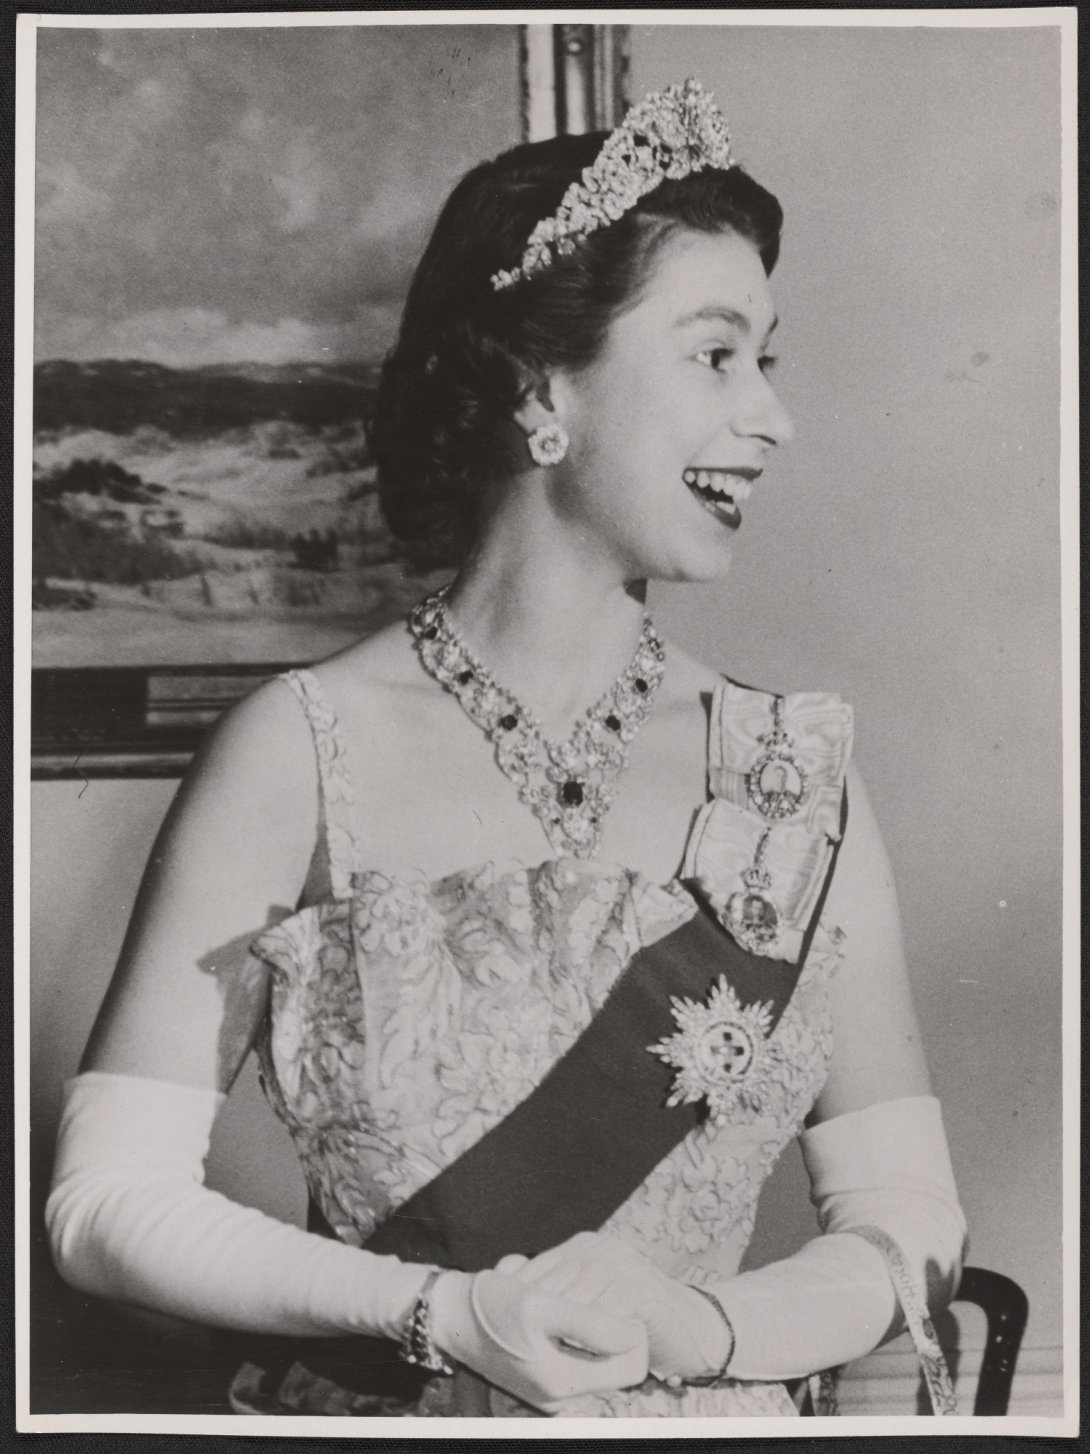 A black and white image of the Queen in 1954 dressed in full formal dinner attire, looking off to the side and smiling.